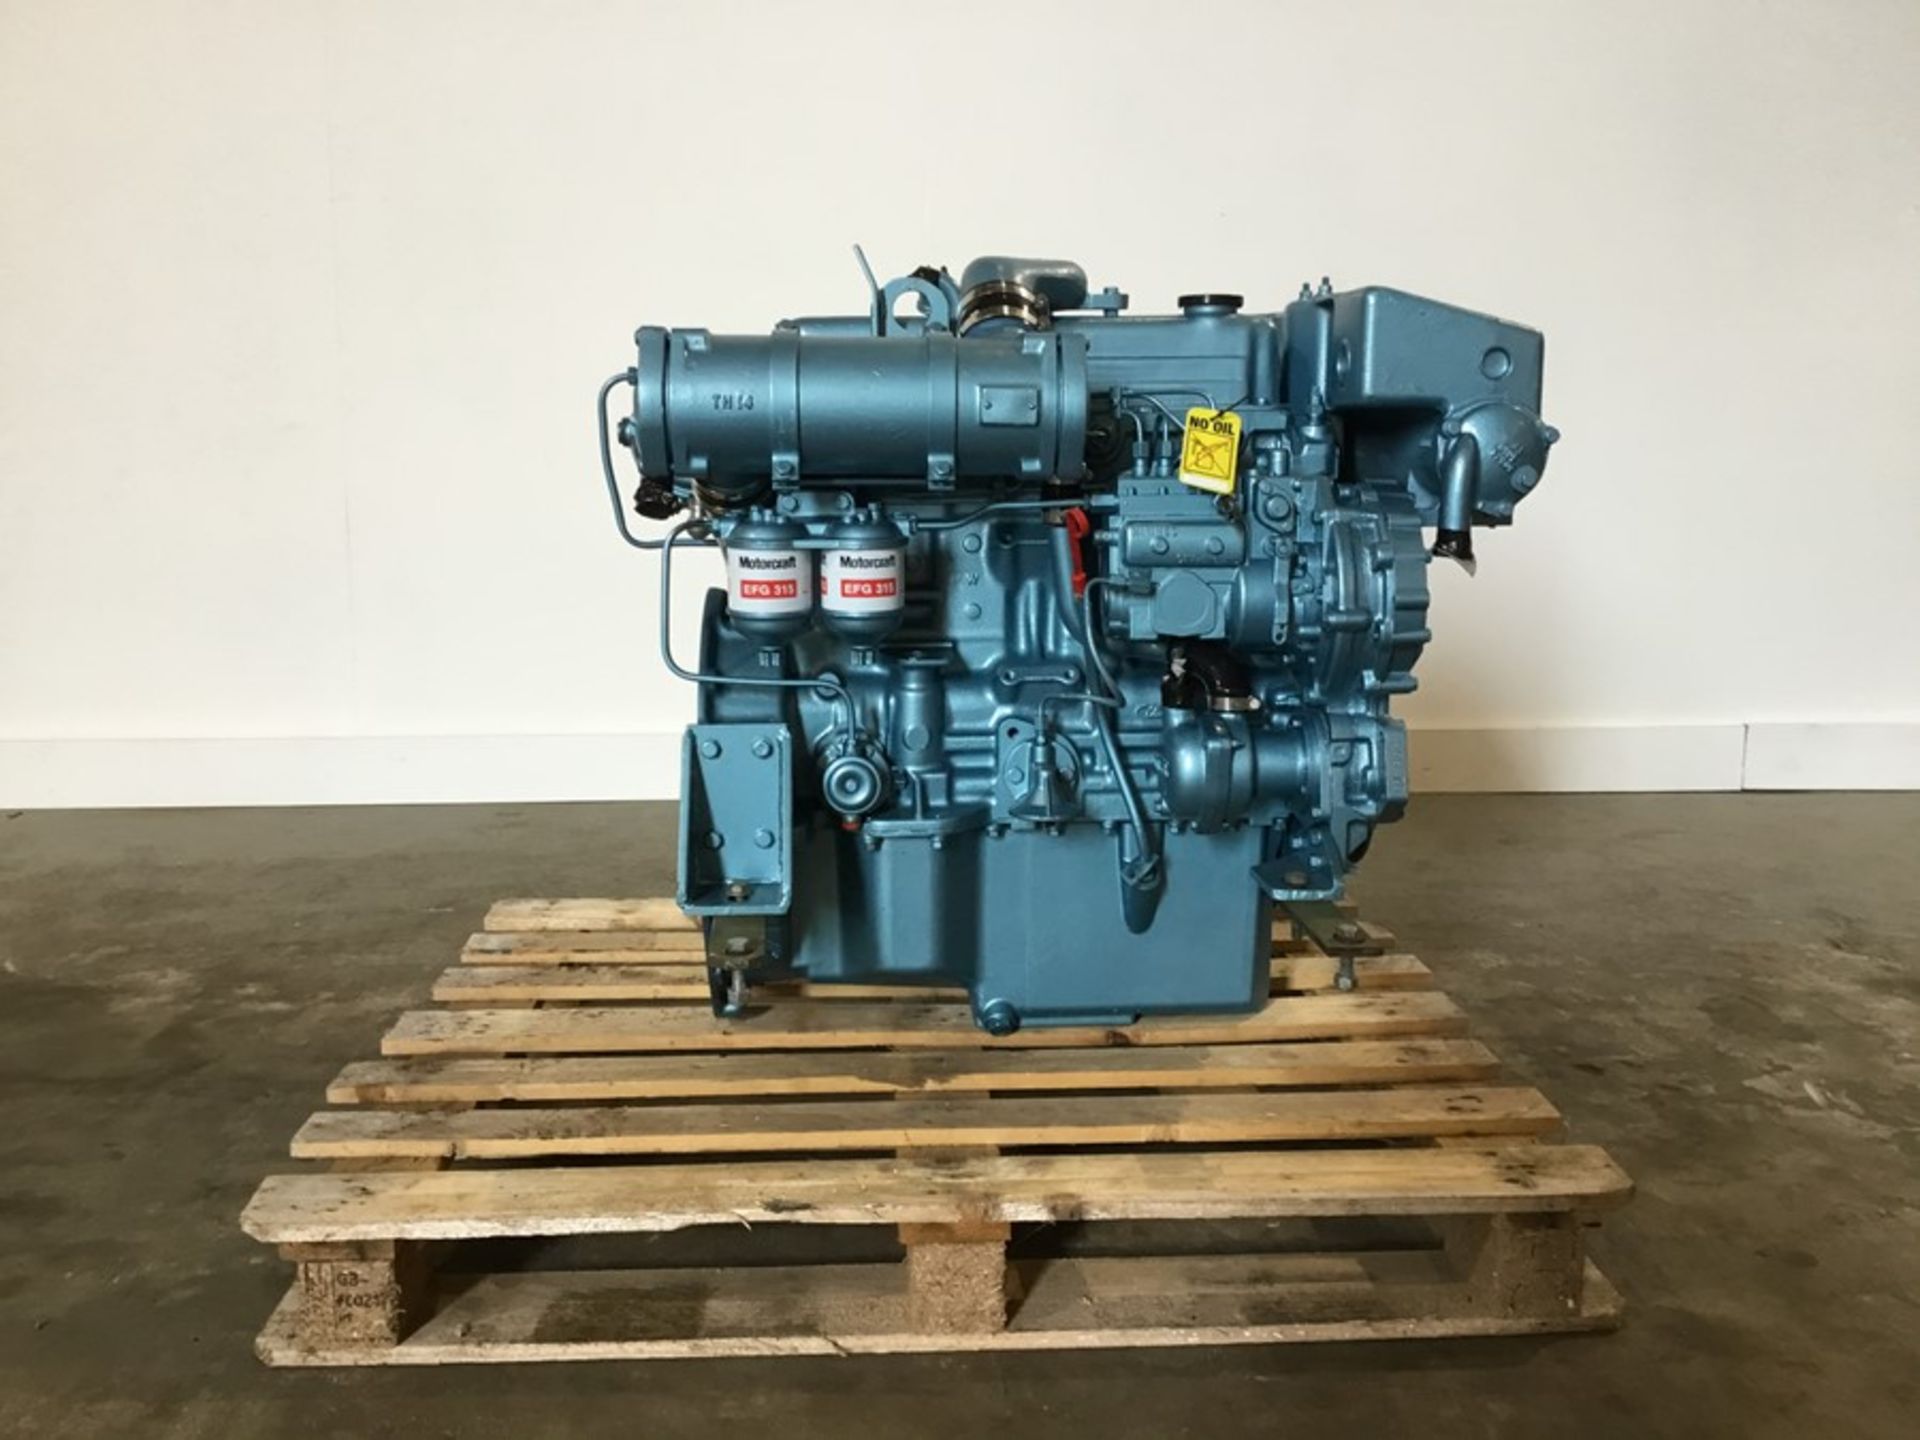 Ford 2722E Marine Diesel engine: Ford 2722e 4cyl Turbo 140Hp @2500Rpm used low hours